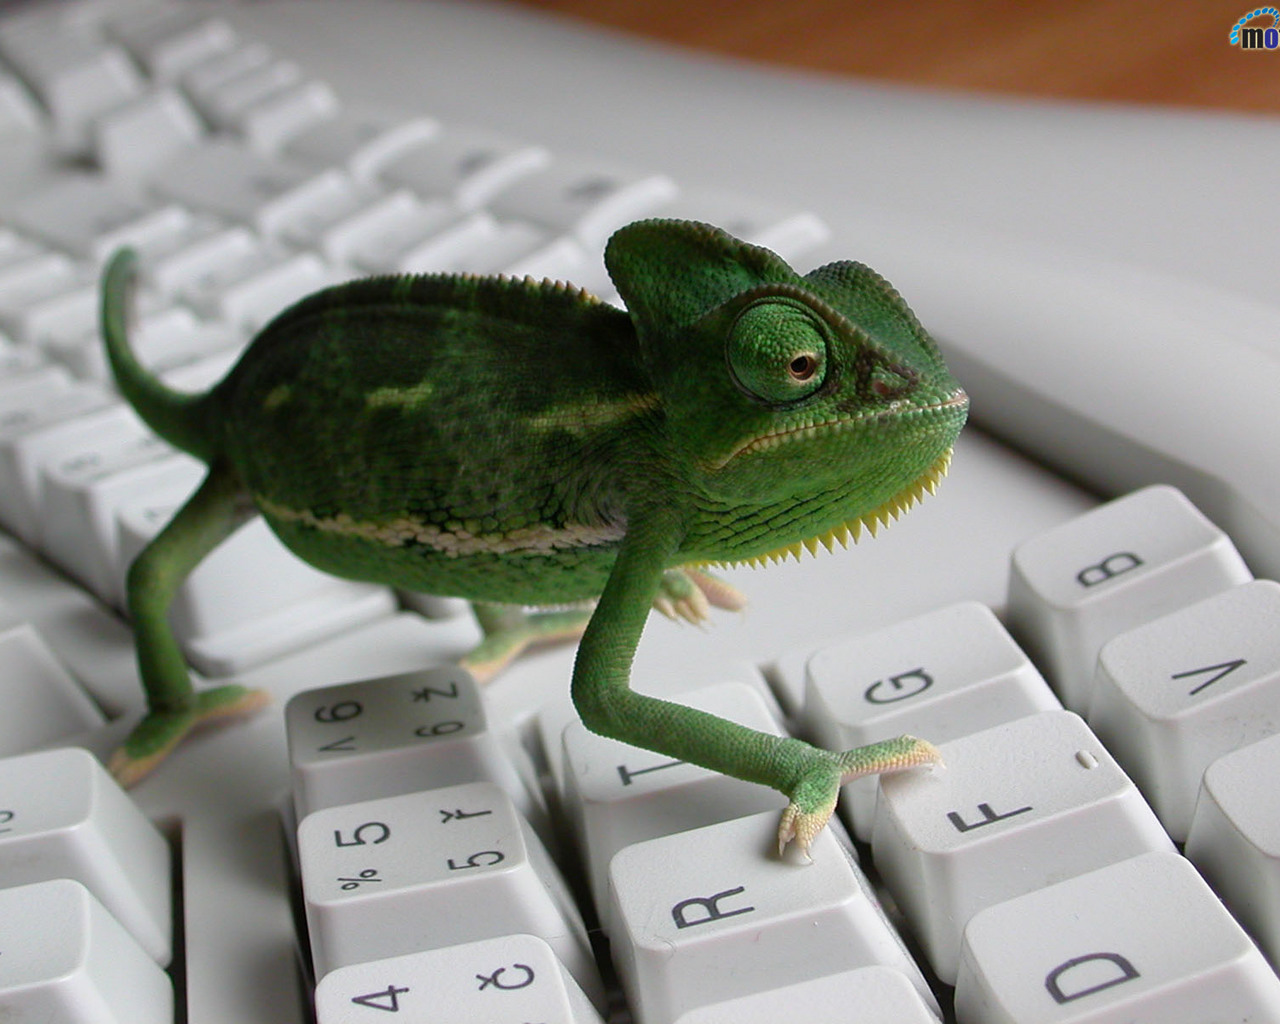 Download High quality On keyboard Reptiles wallpaper / 1280x1024